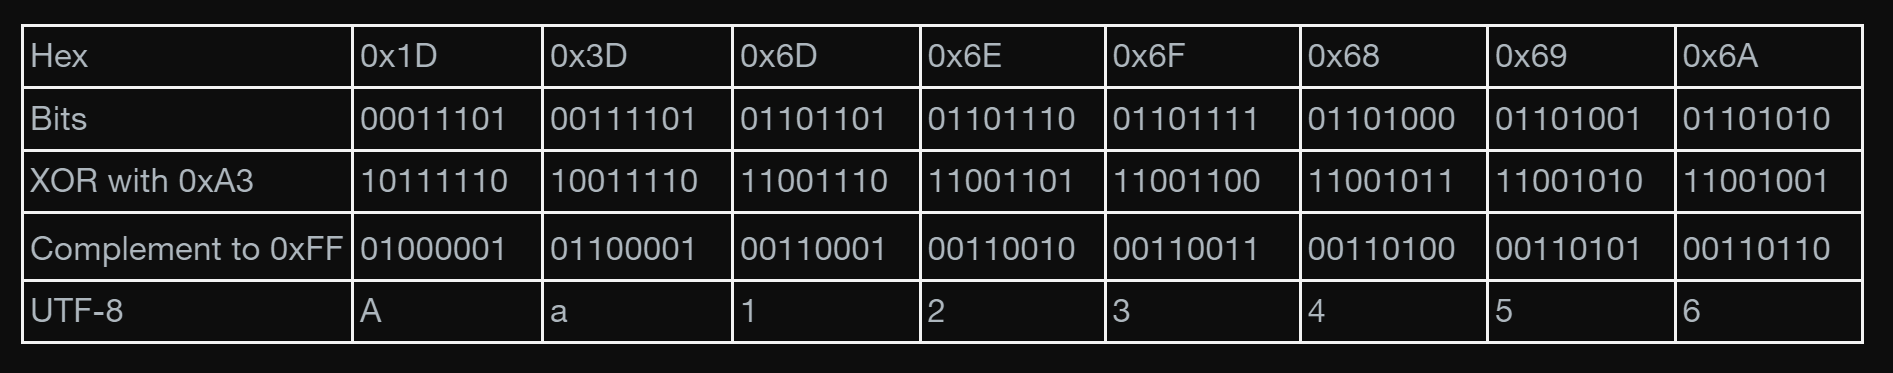 Steps to decrypt a password in WinSCP include performing the XOR with 0xA3 and finding the complement, as shown in the table. 